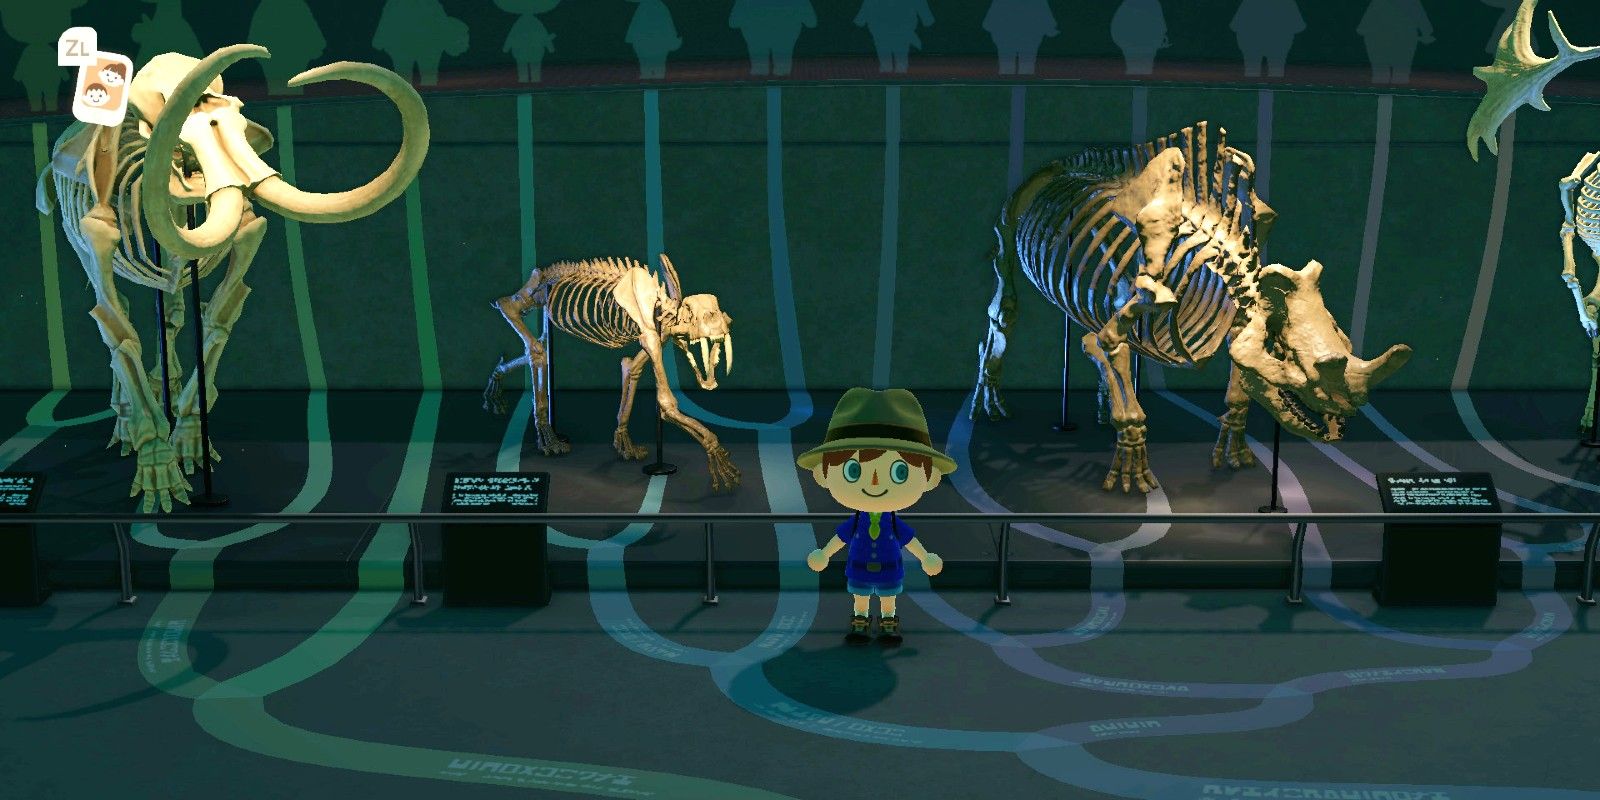 A player stands in front of the fossil displays in the museum in Animal Crossing: New Horizons